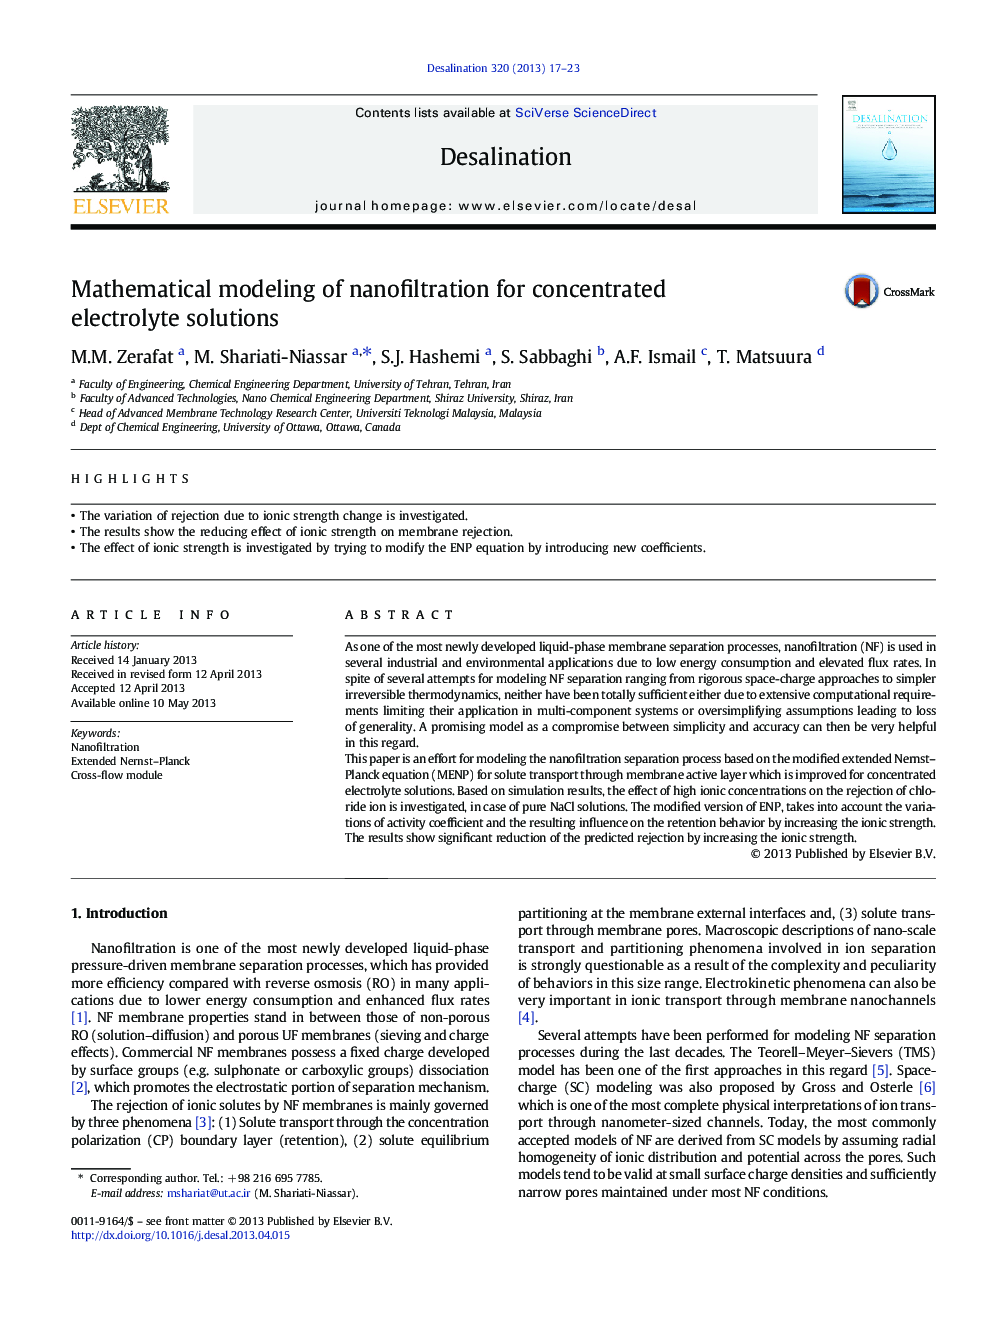 Mathematical modeling of nanofiltration for concentrated electrolyte solutions